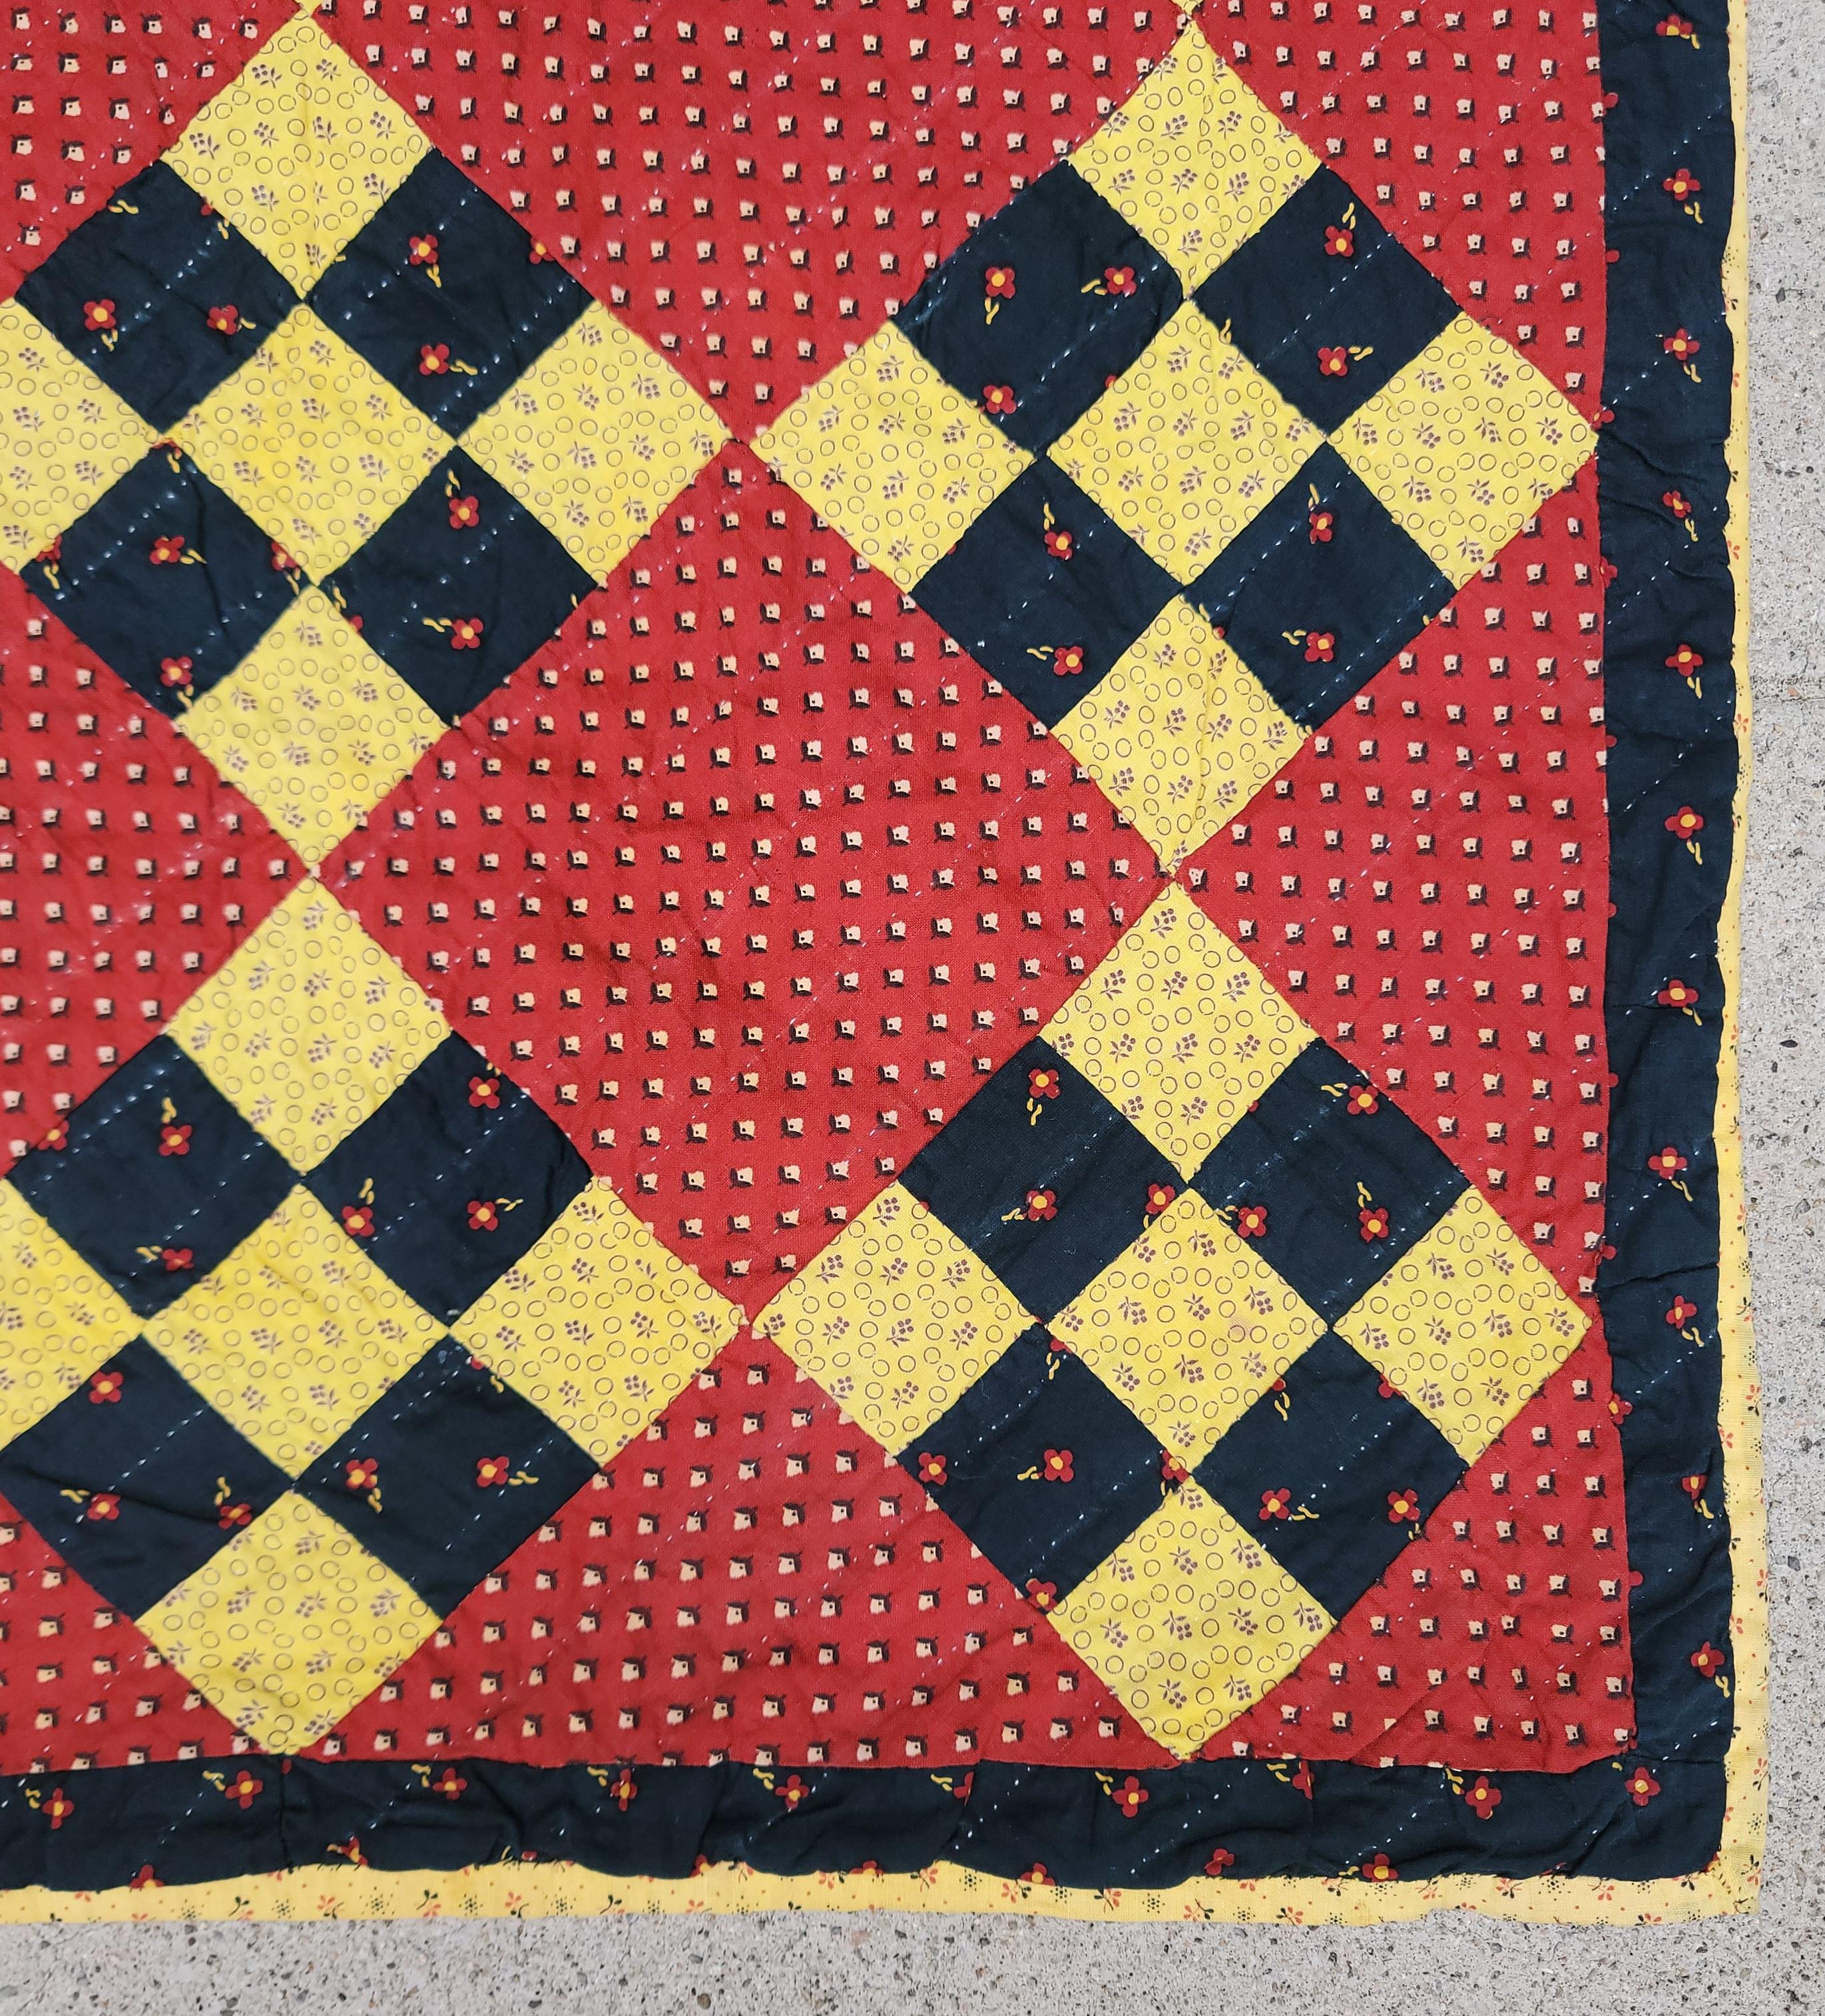 Hand-Crafted 19th C Nine Patch Chain Crib Quilt For Sale